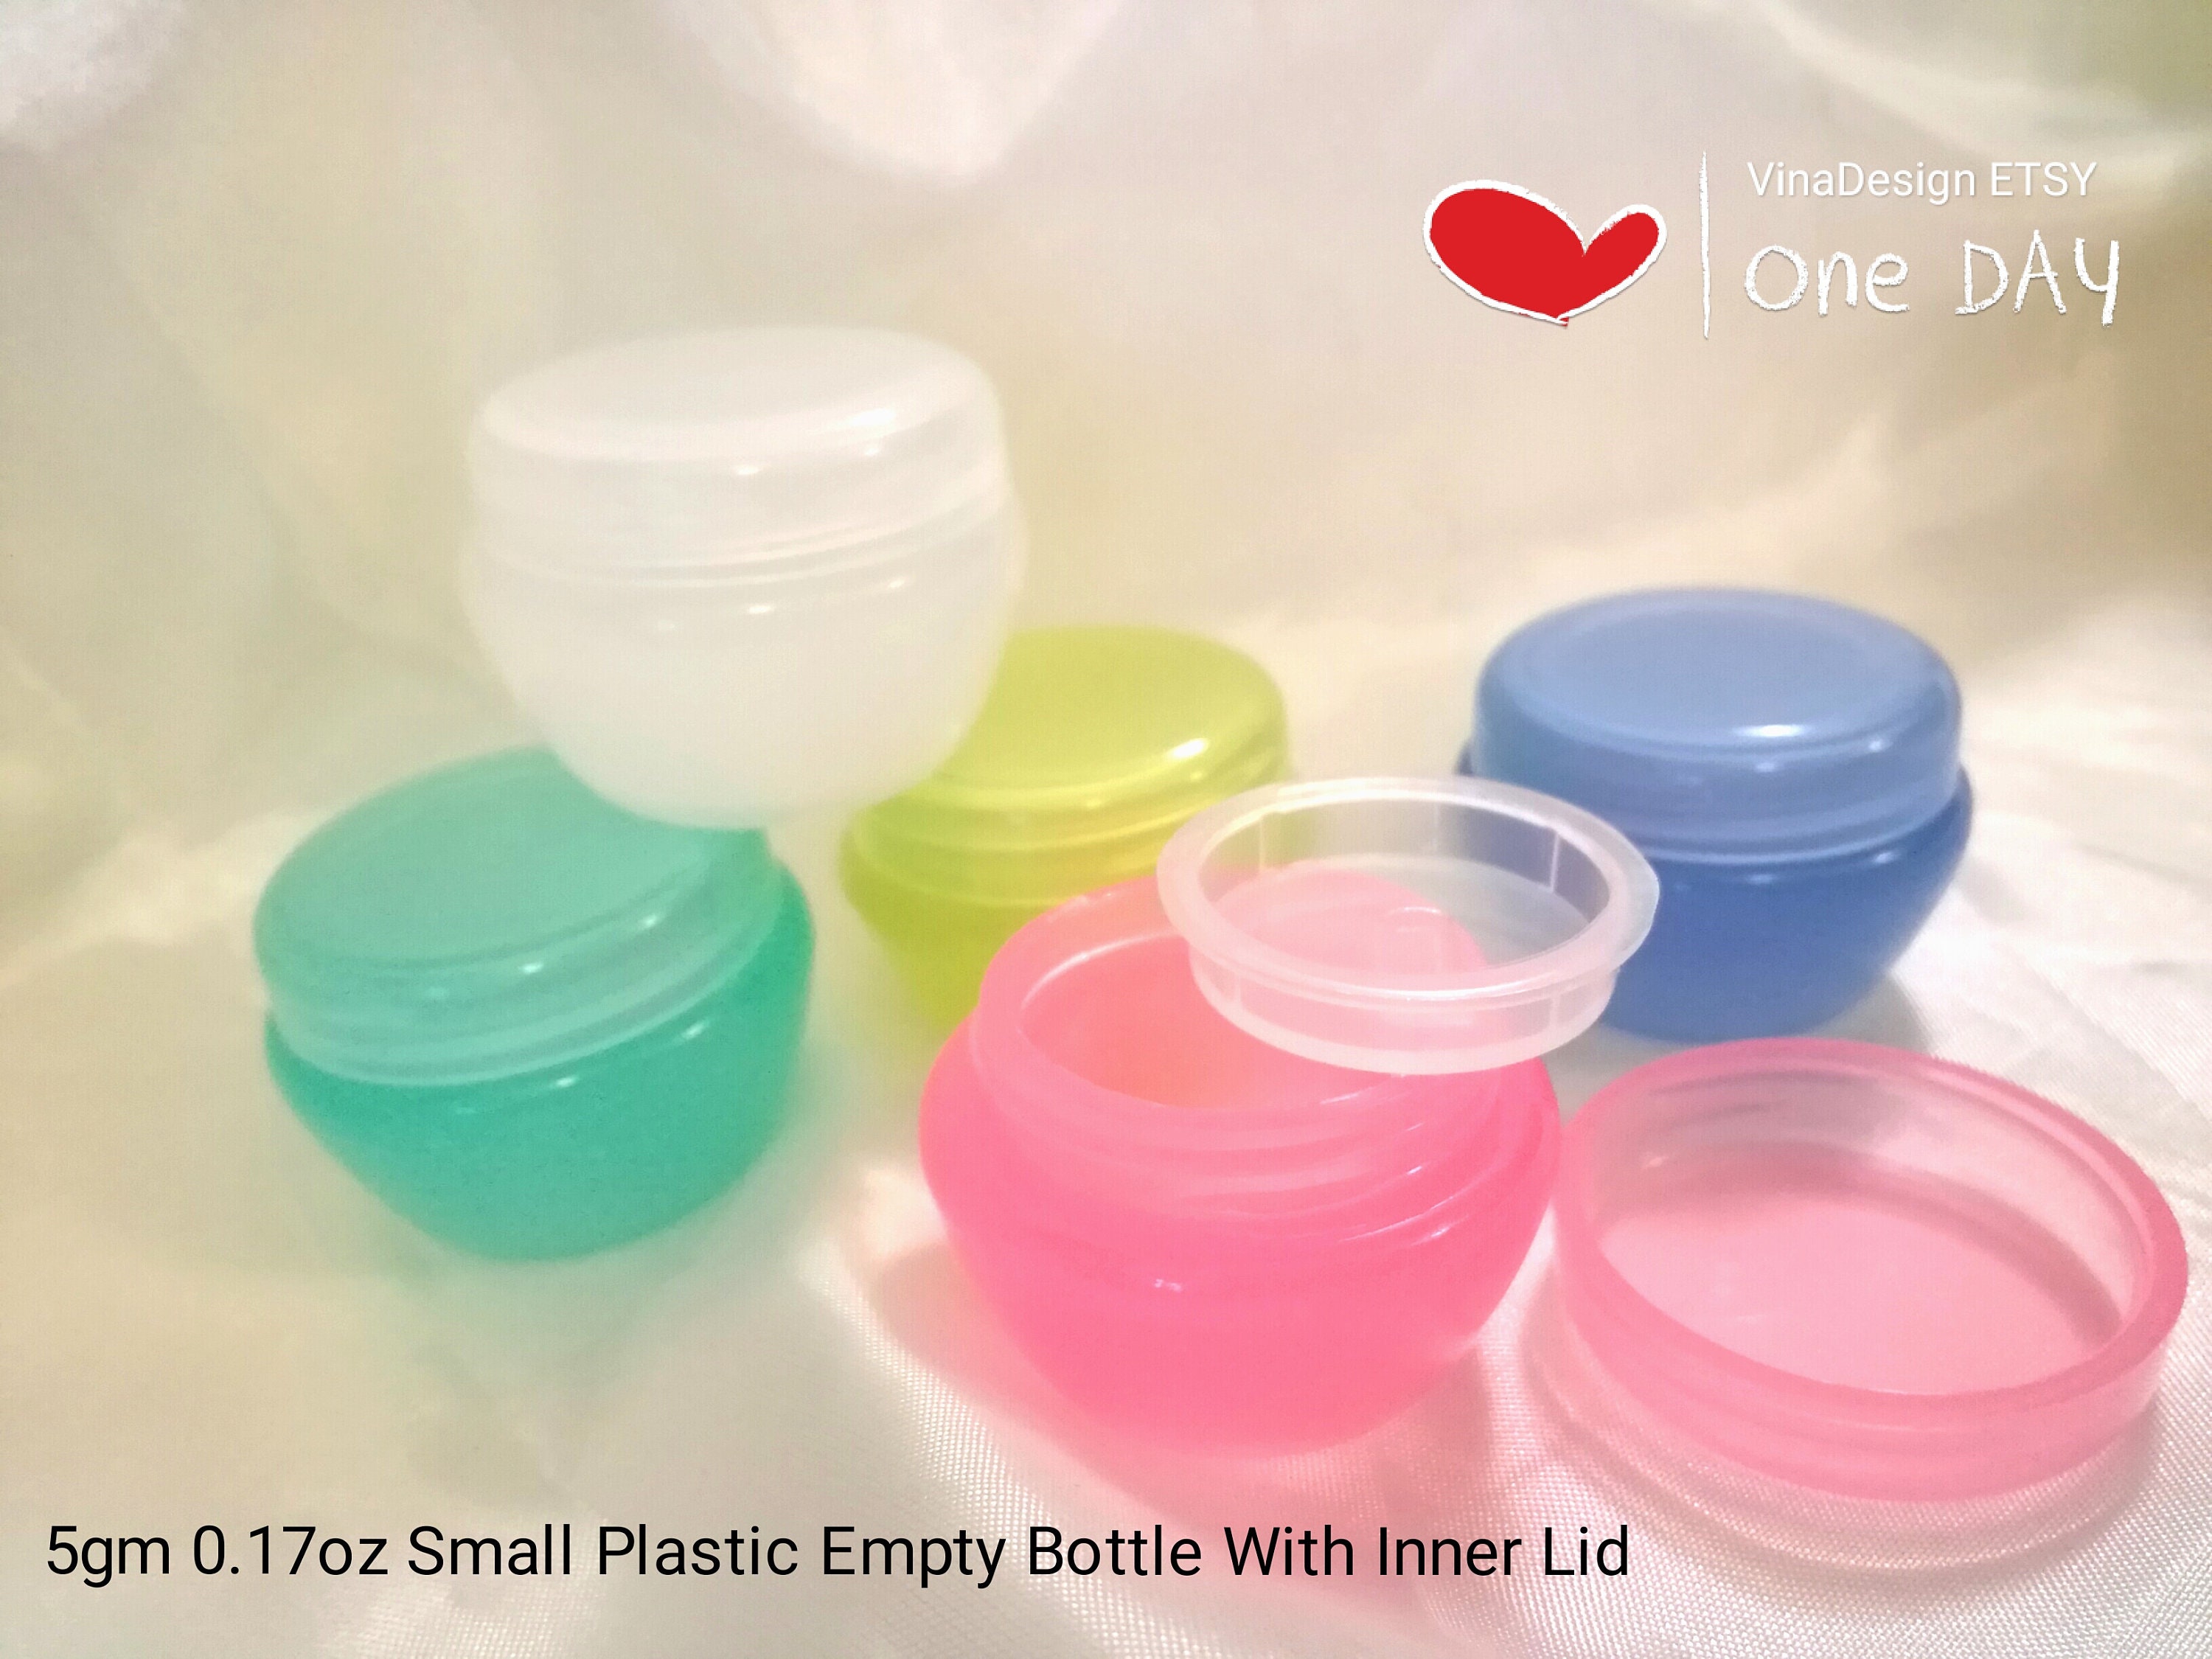 Small Plastic Container in Hand Stock Image - Image of gift, safe: 28601427